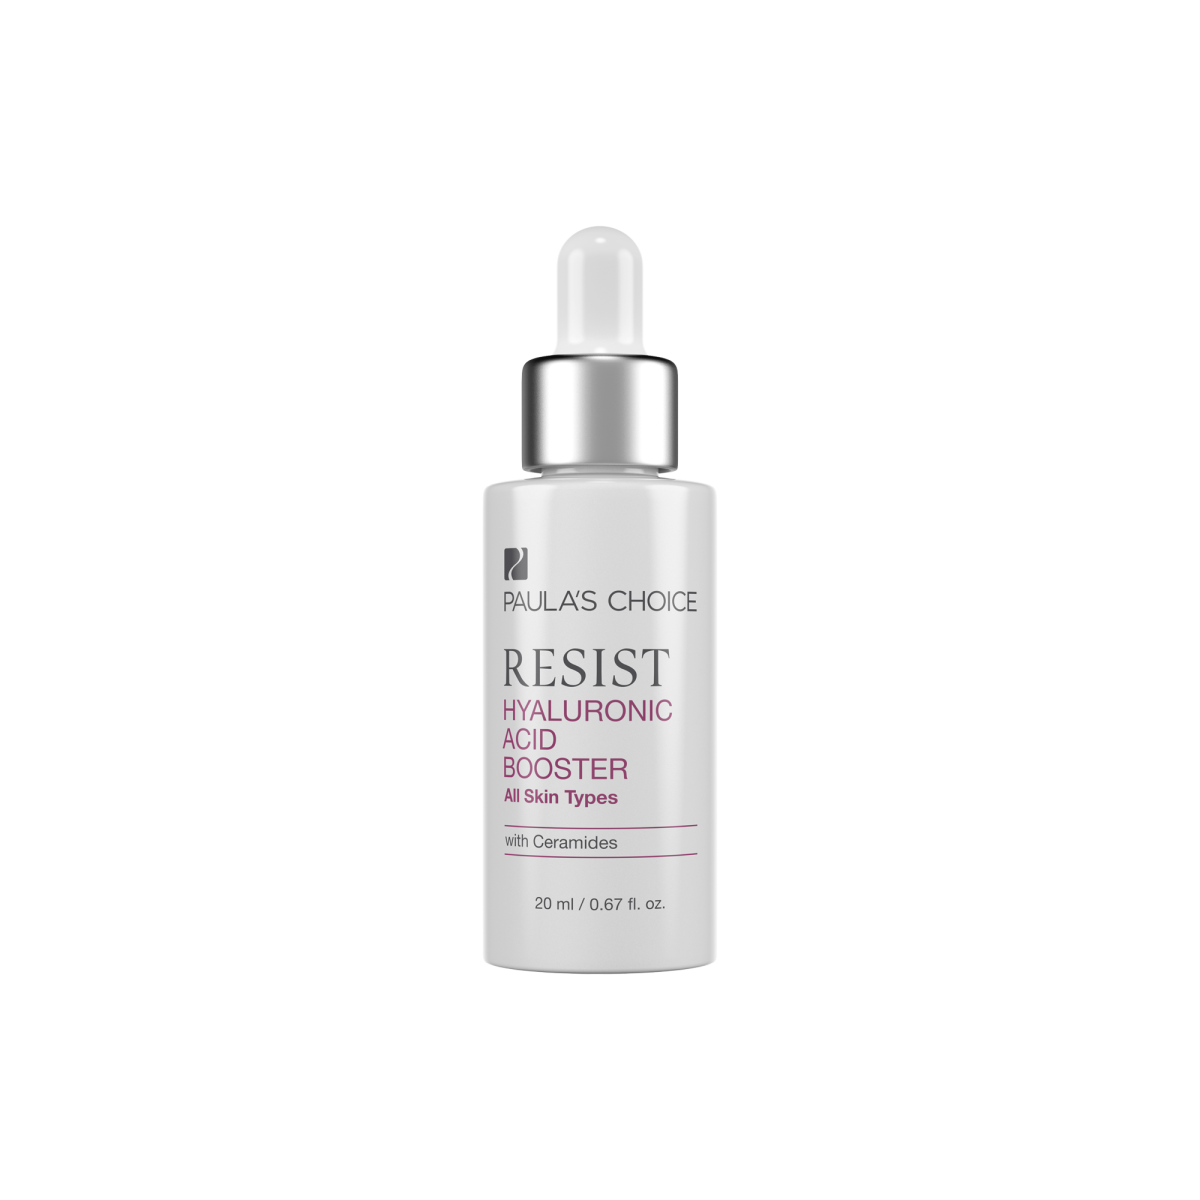 Paula's Choice Hyaluronic Acid Booster, $46, available here.